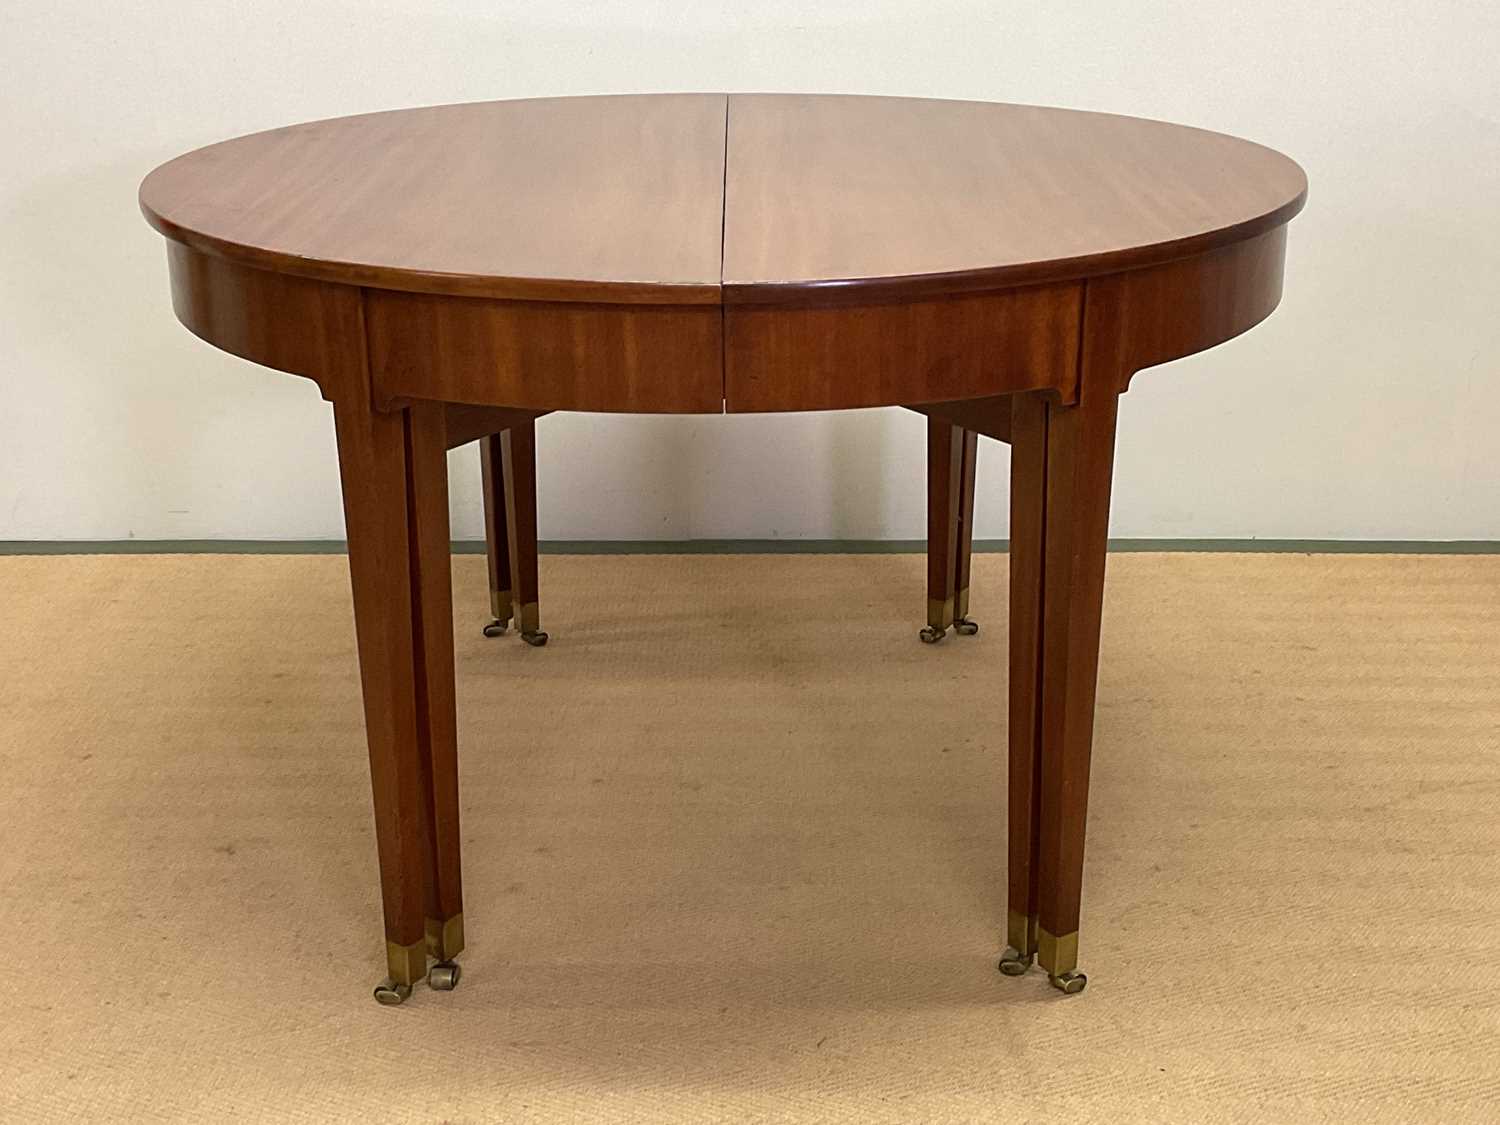 KAARE KLINT FOR RUD RASMUSSEN; a Danish early 20th century circular dining table, with paper label